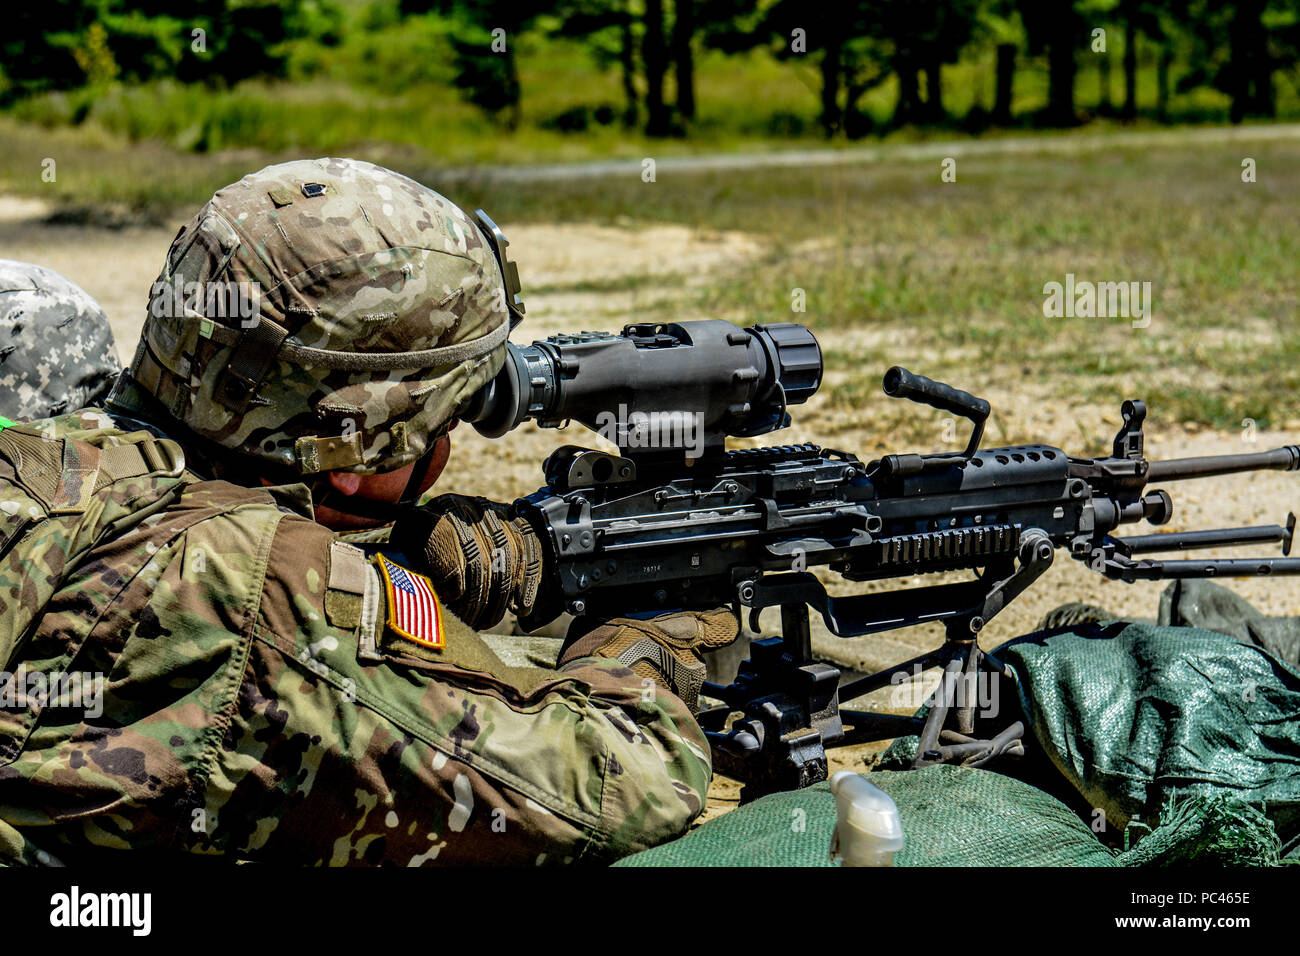 U.S. Army Reserve Troop List Unit Soldiers participate in ground qualification with an M249 light machine gun during Operation Cold Steel II, hosted by U.S. Army Civil Affairs and Psychological Operations Command (Airborne), July 18, 2018 at Joint Base McGuire-Dix-Lakehurst, N.J. Operation Cold Steel is the U.S. Army Reserve's crew-served weapons qualification and validation exercise to ensure America's Army Reserve units and Soldiers are trained and ready to deploy on short notice as part of Ready Force X and bring combat-ready and lethal firepower in support of the Army and our joint partner Stock Photo